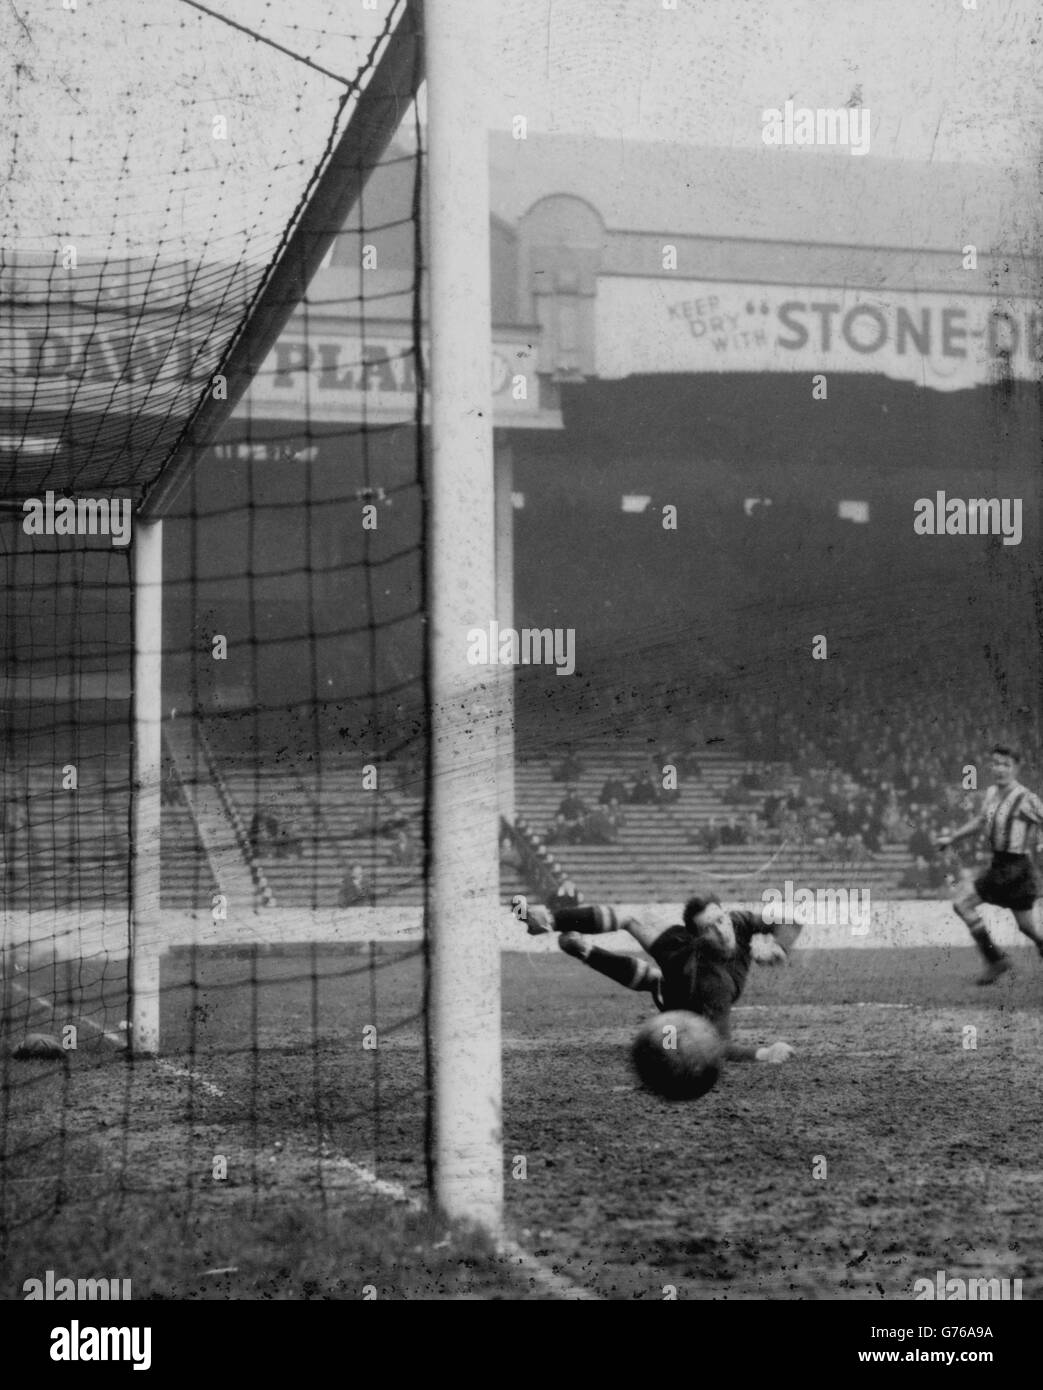 Sheffield United goalkeeper Alan Hodgkinson is well beaten by a cross-shot from Huddersfield Town centre-forward Dave hickson (extreme right) in the second replay of the FA Cup thrid round tie at Maine Road. The ball hit the post and rebounded to Huddersfield Town wing half, who scored the equalising goal. A later goal by Hickson gave Huddersfield Town victory by two goals to one. Stock Photo